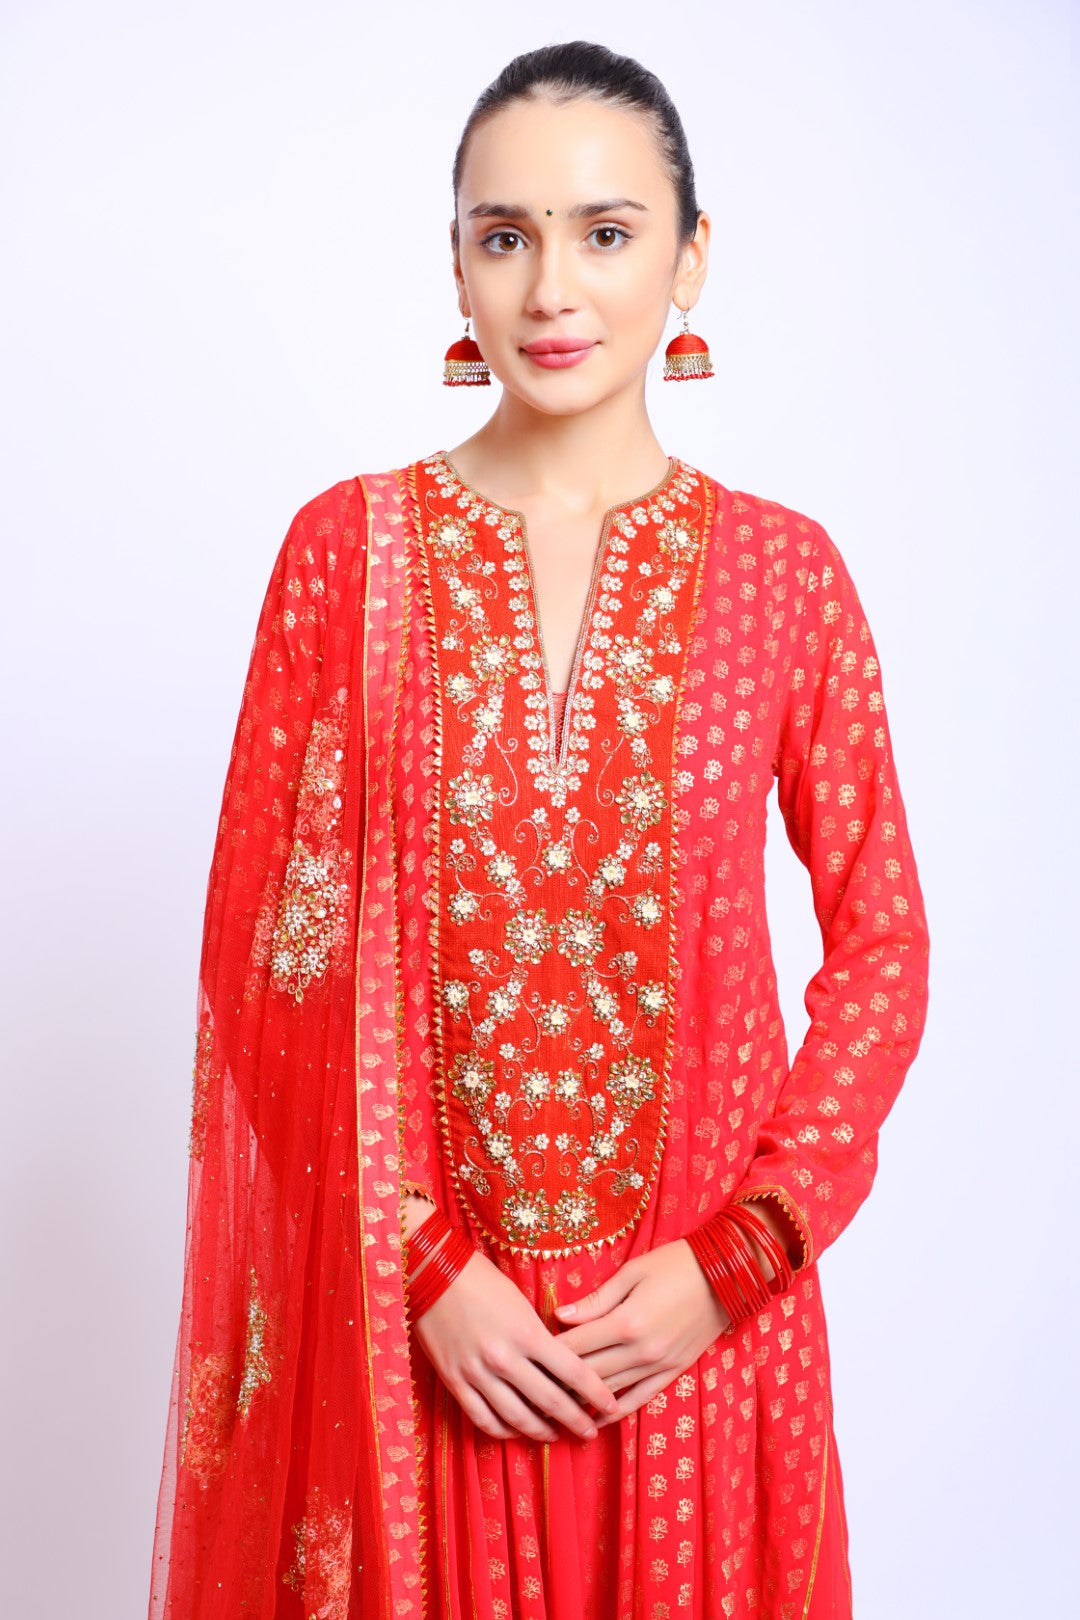 Coral Red Georgette Godet Kalis Kurta in Silk Embroidered Yoke paired with Emb Dupatta & Churidar